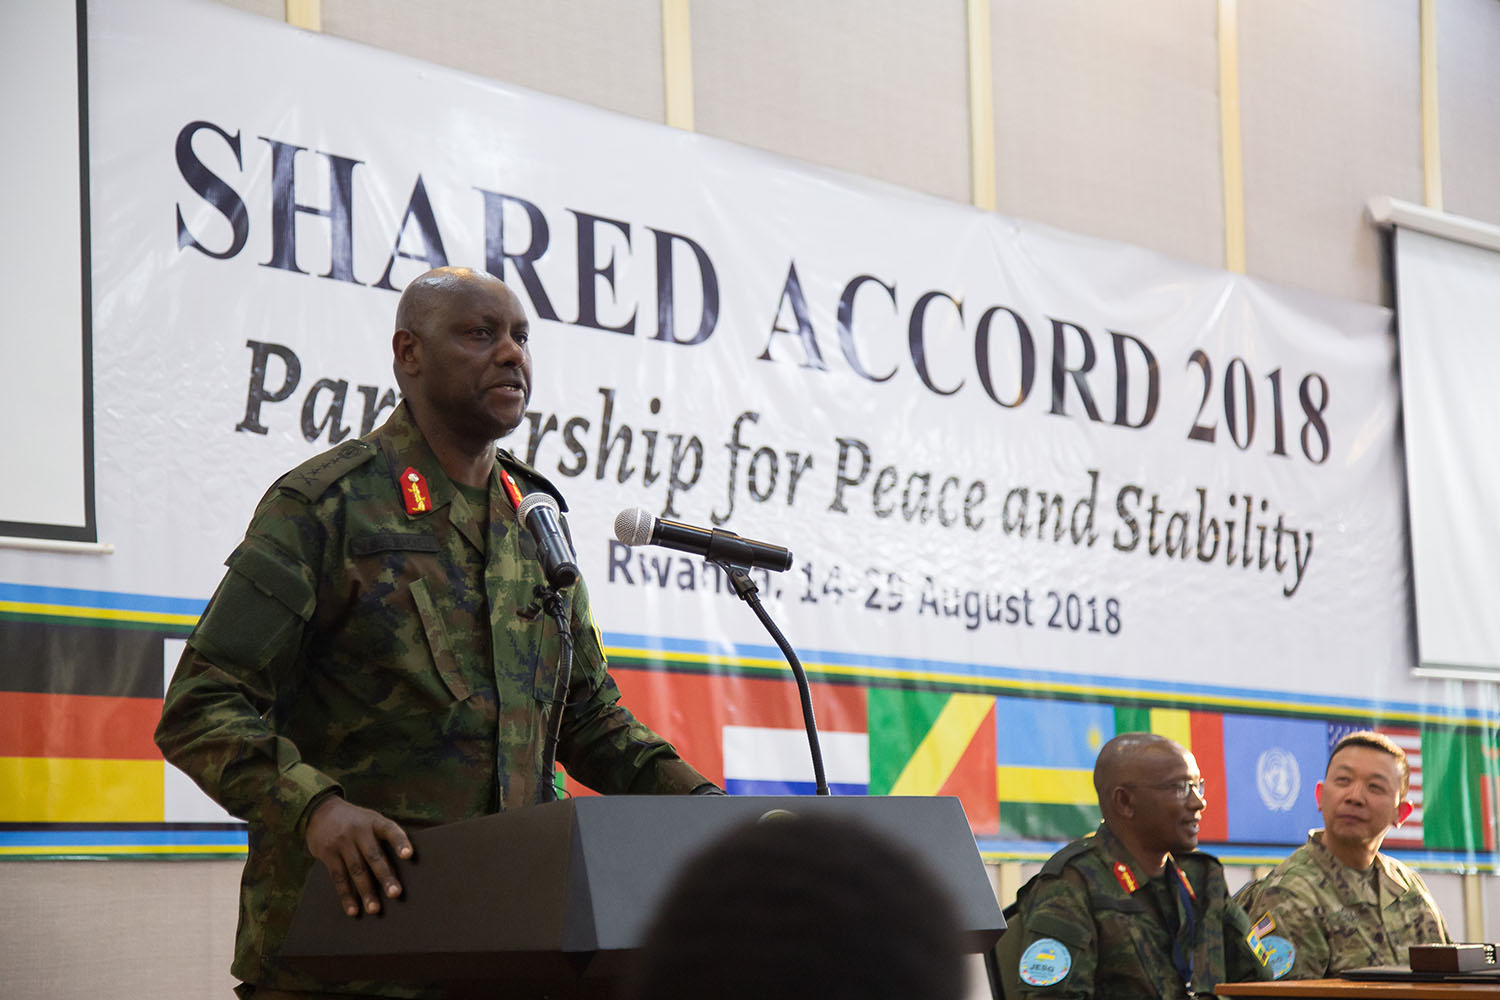 Army Chief of Staff, Lt Gen Jacques Musemakweli, speaks during the closing ceremony of the two-week Command Post Exerciseâ€˜Shared Accord 2018 at Rwanda Military Academy-Gako, Bugesera District on Tuesday. Nadege Imbabazi.